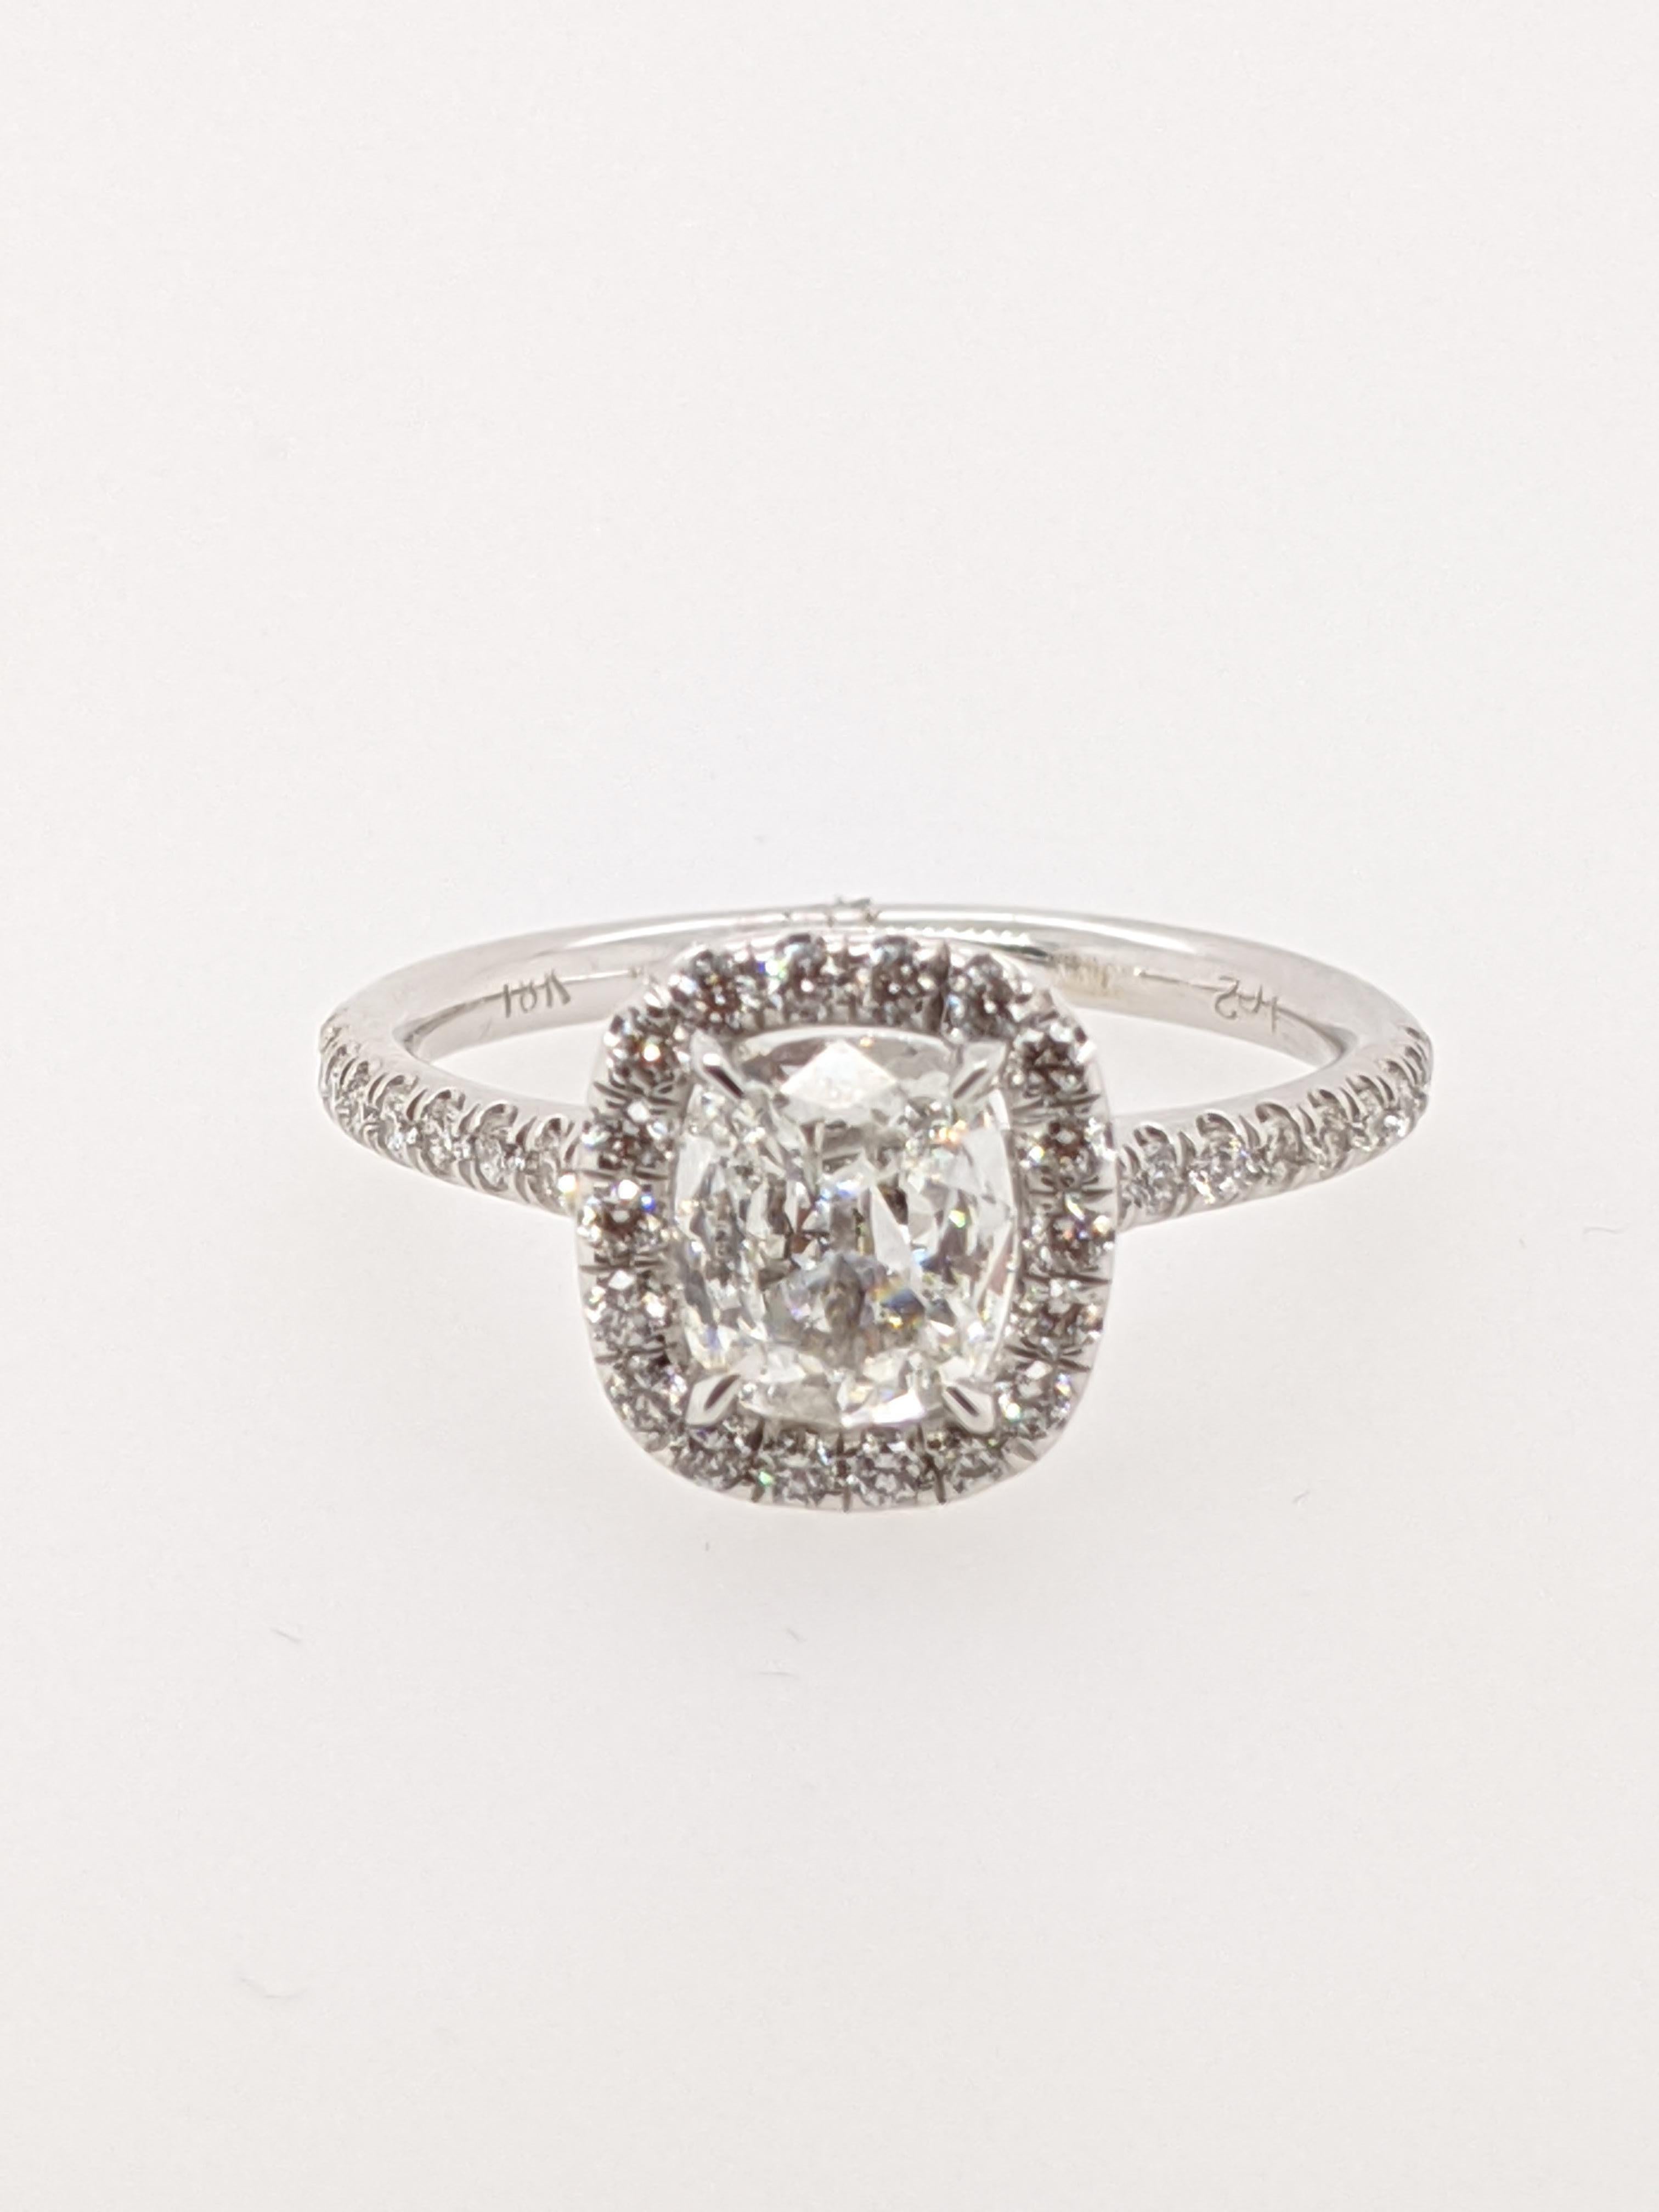 Classic 18 karat white gold  halo ring handmade in the United States.  Featuring a 1.02 carat H color I1 clarity antique style cushion with GIA grading report number 7328624400.

This listing has one of hundreds of cushion cut diamonds in our